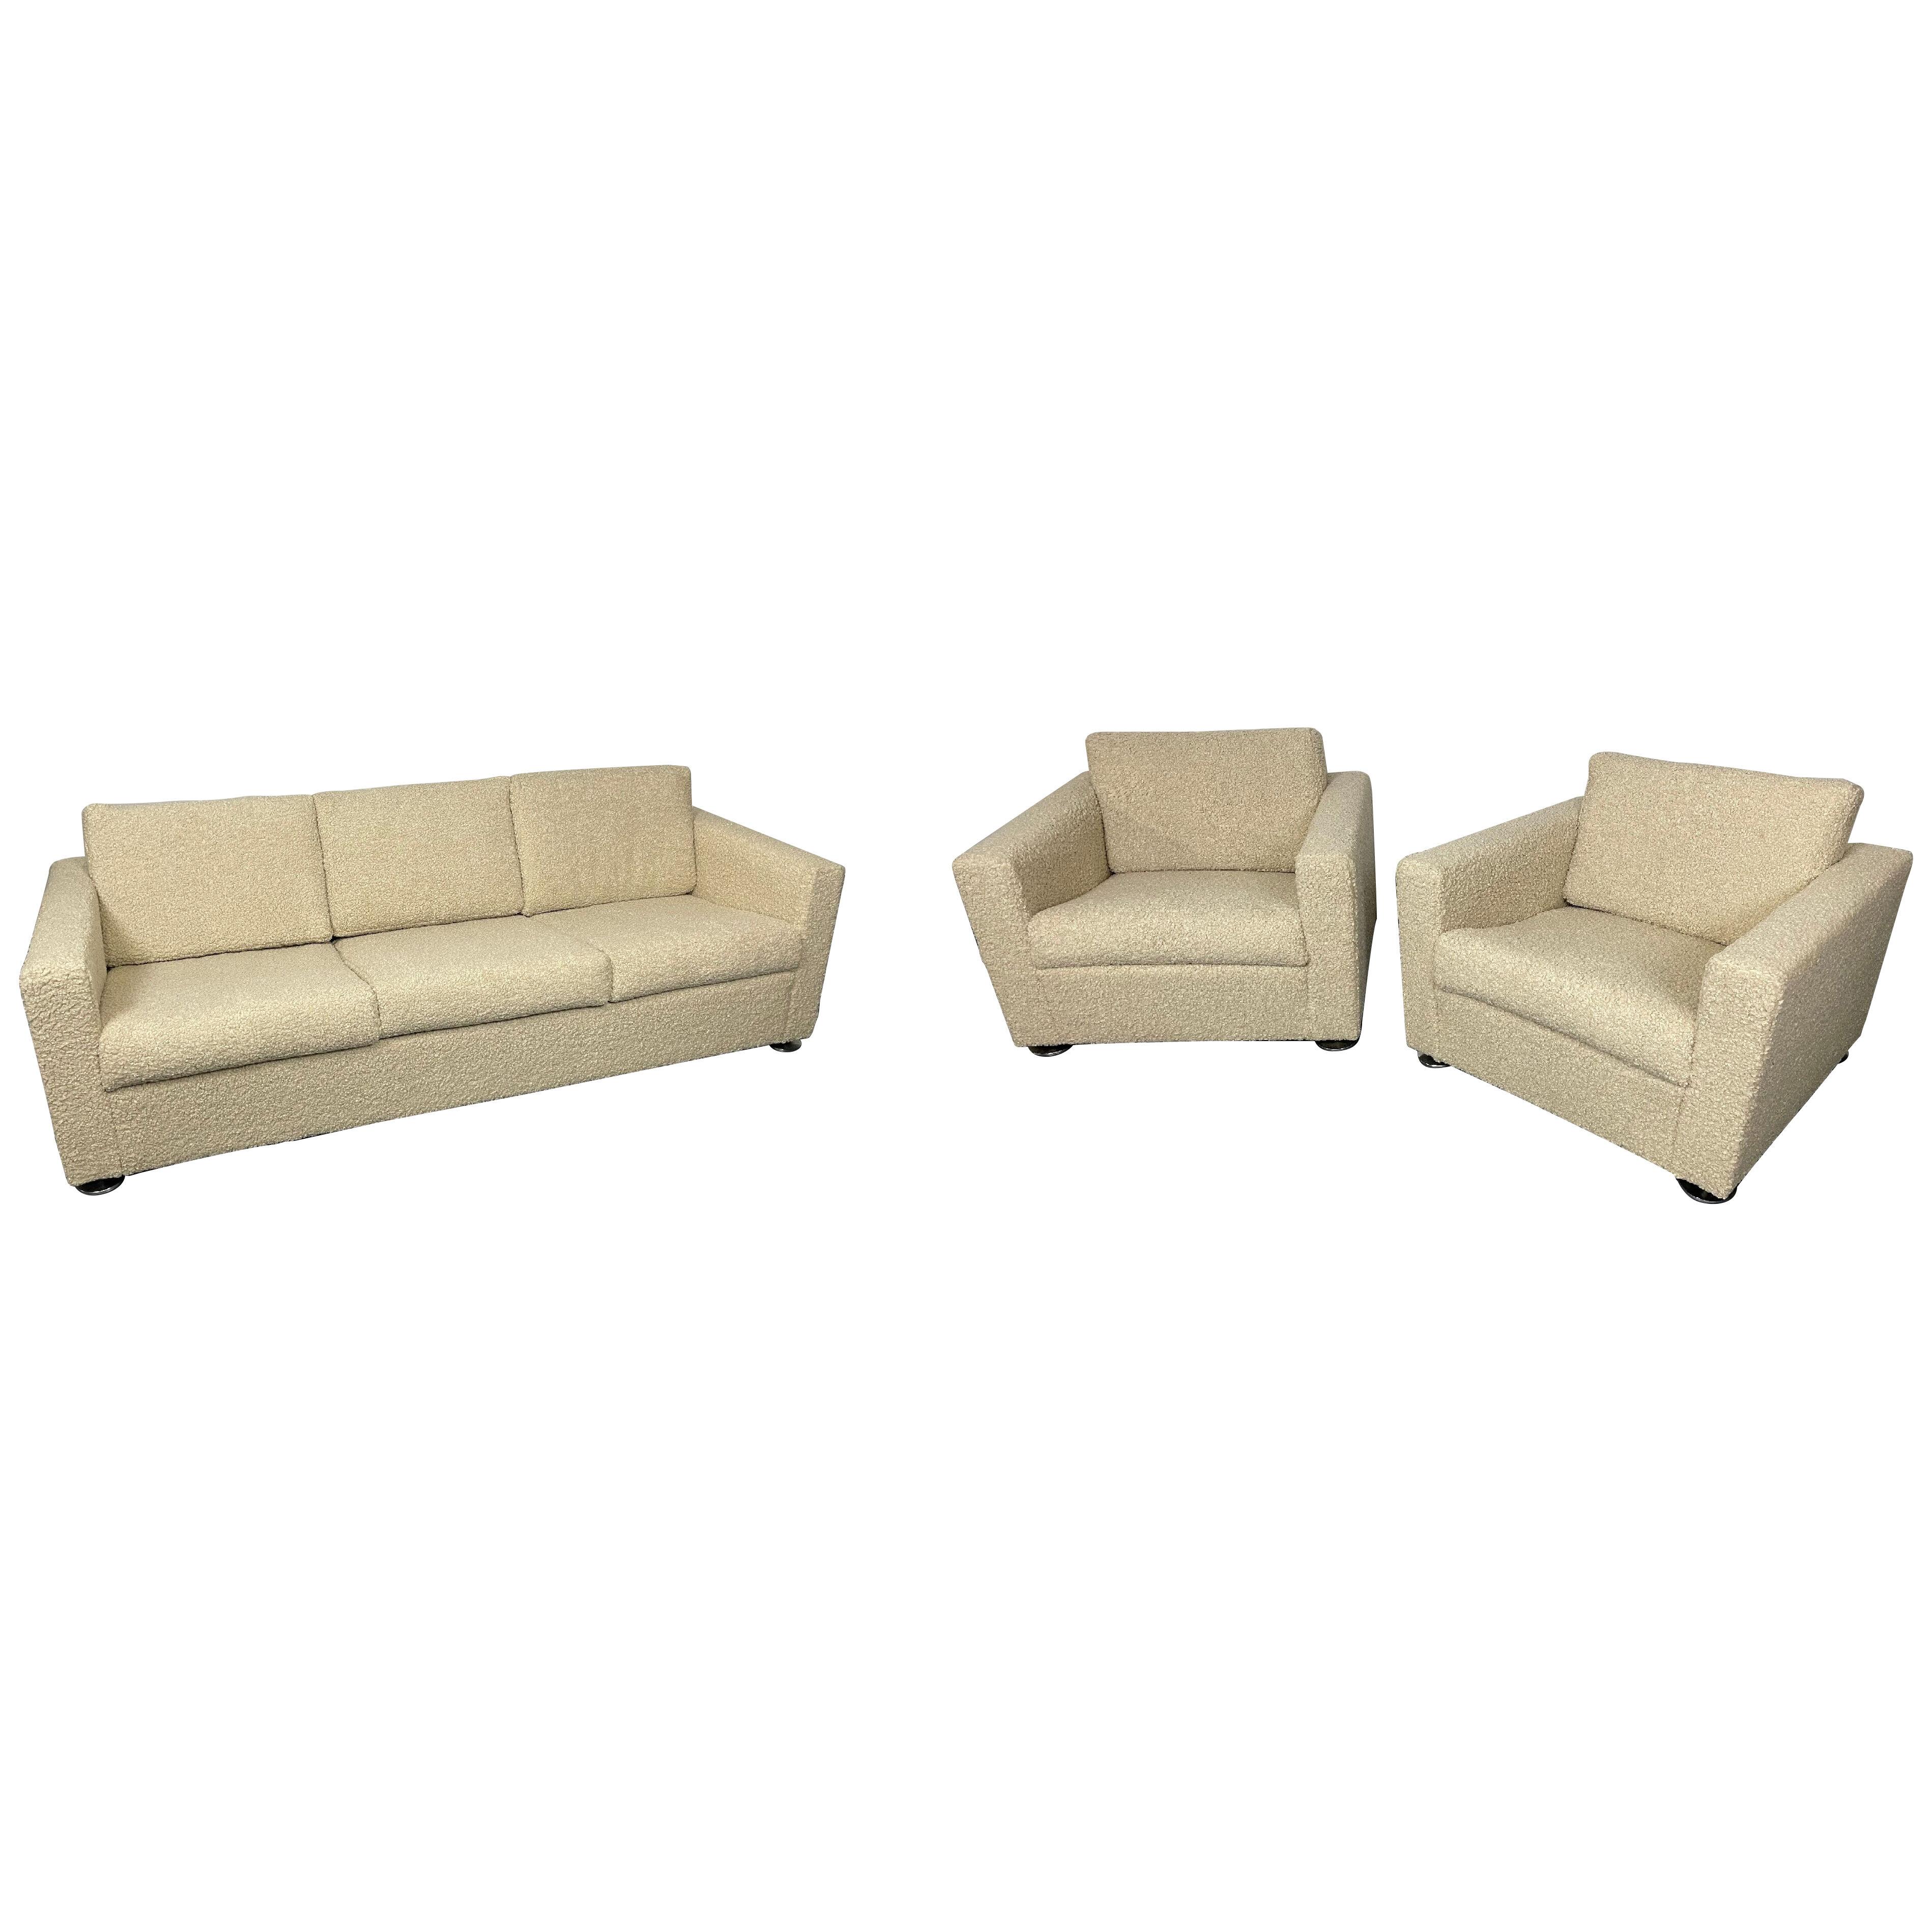 Stendig Living Room, Sofa, Pair of Cube Chairs, New Boucle, Switzerland, Labeled